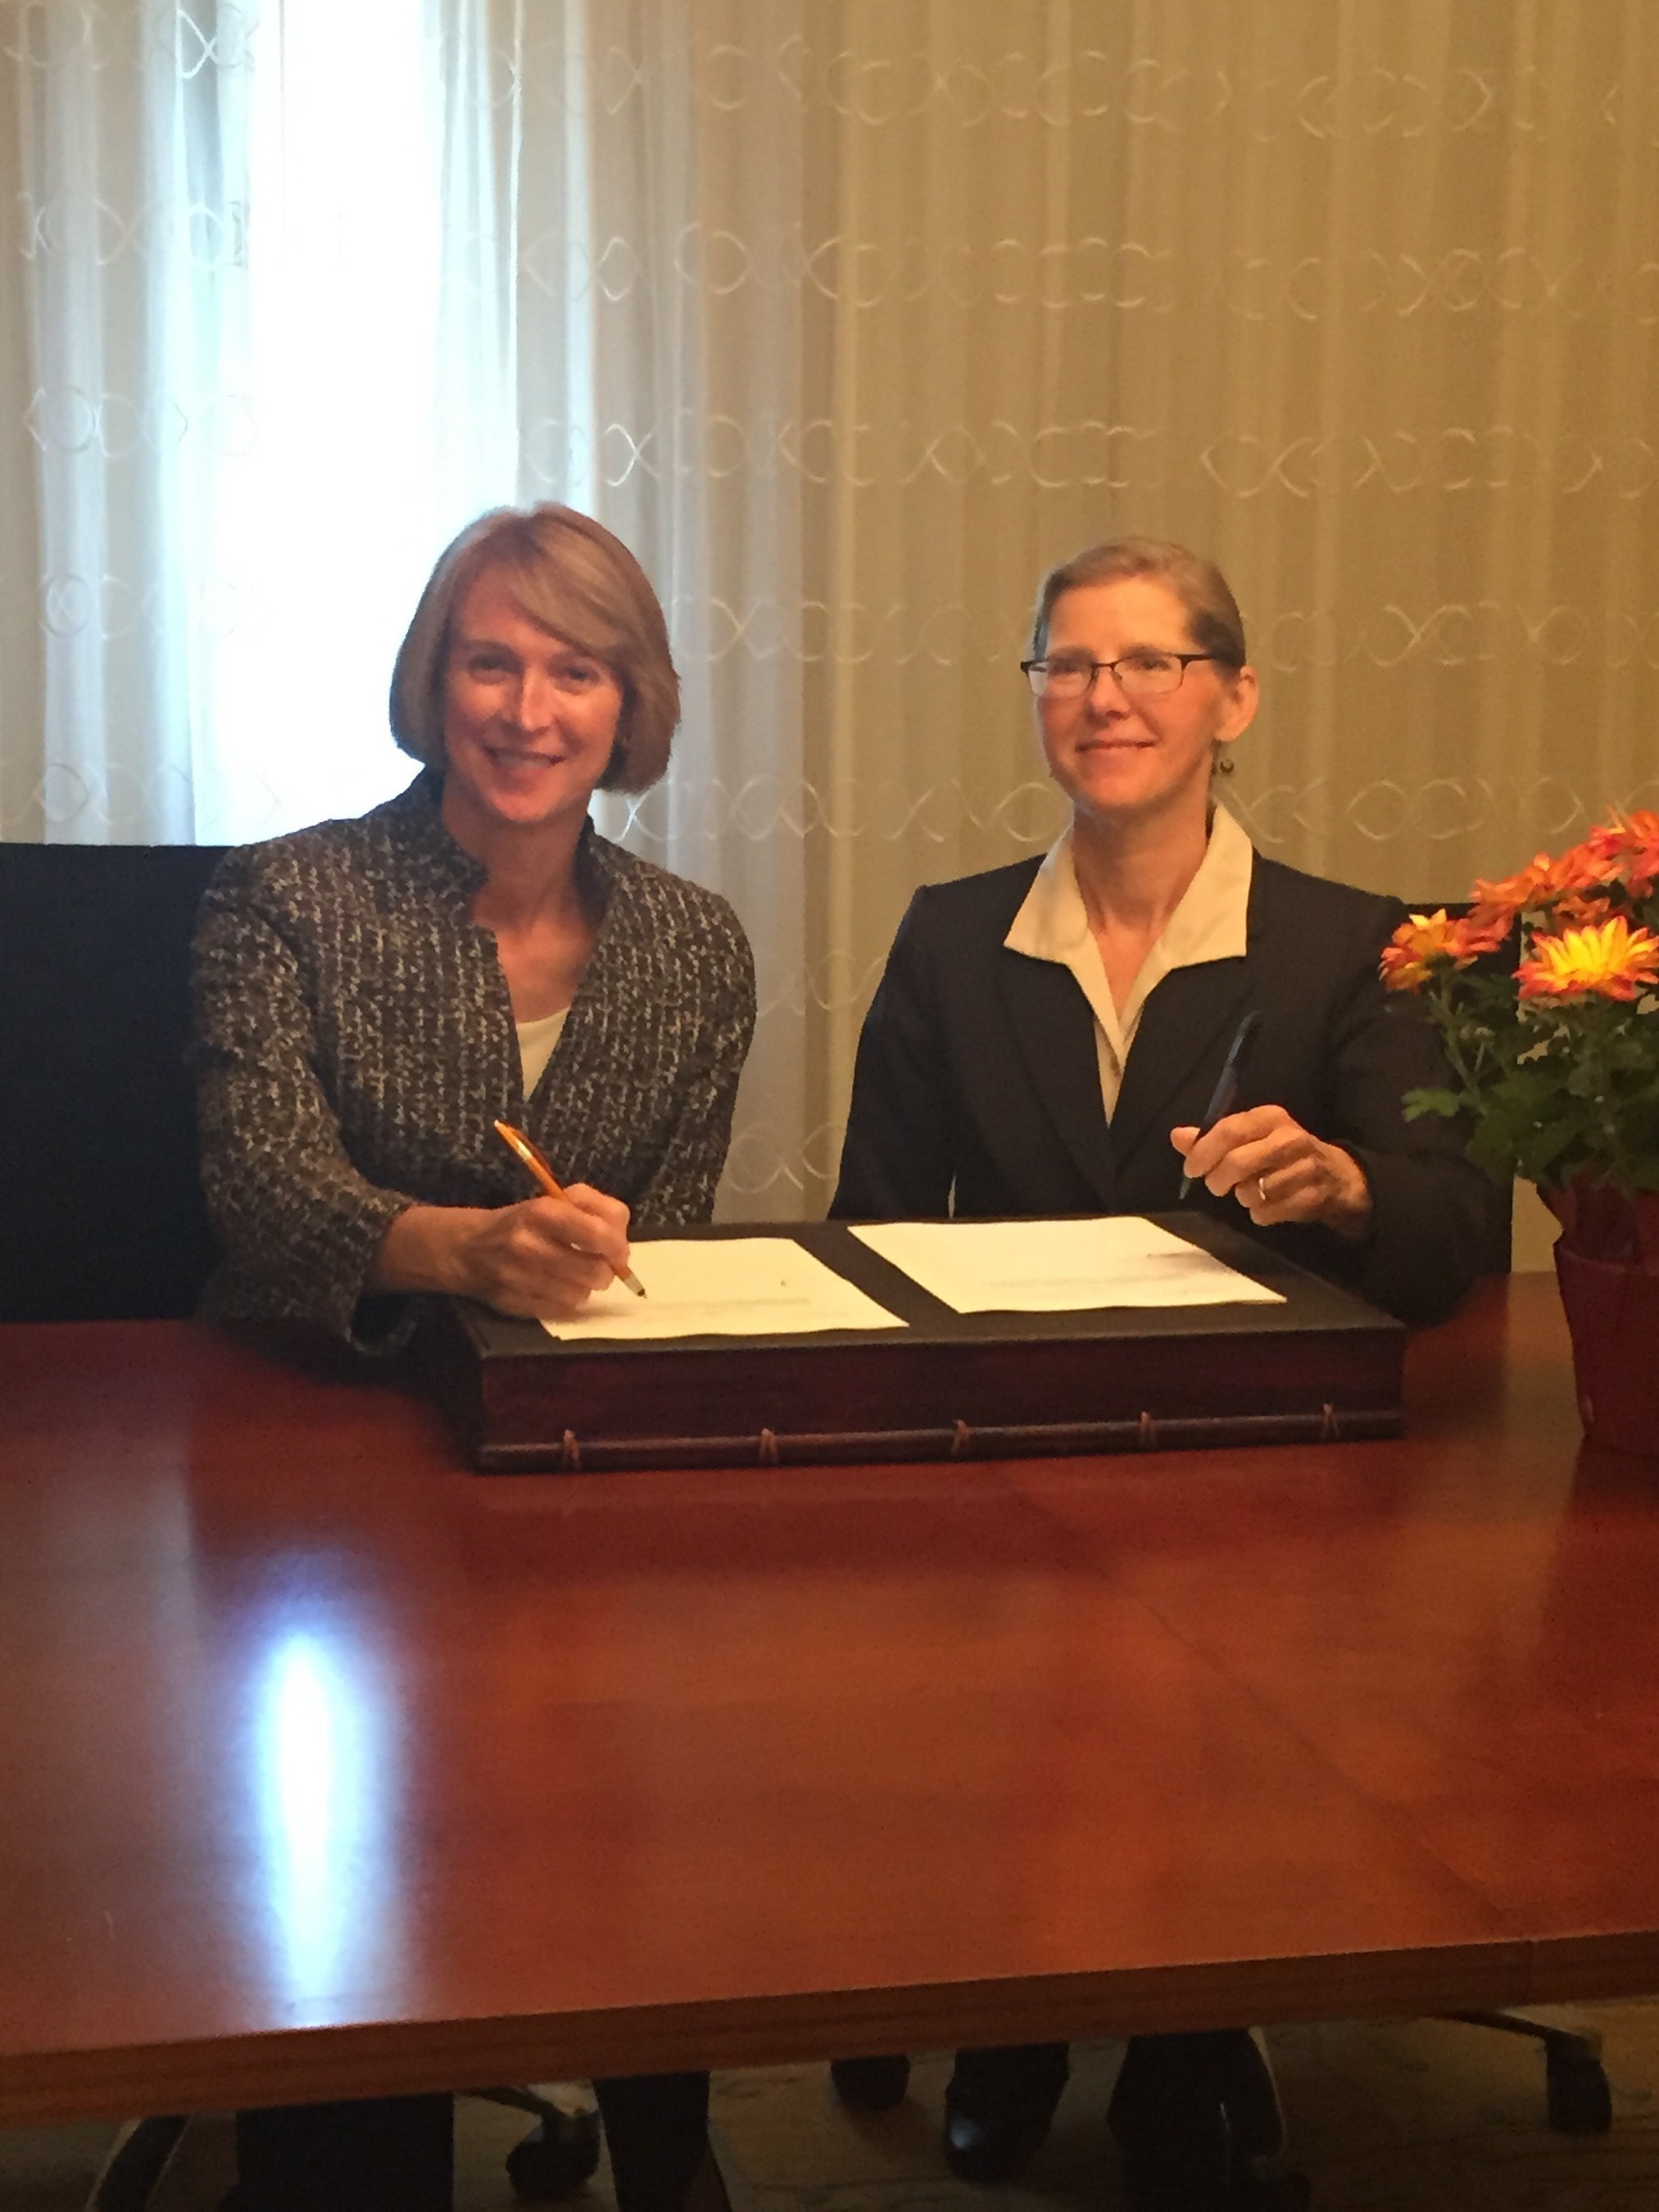 Dr. Helen Riess, Founder of Empathetics, Inc., and Dr. Susan Frampton, President of Planetree, sign strategic partnership agreement.